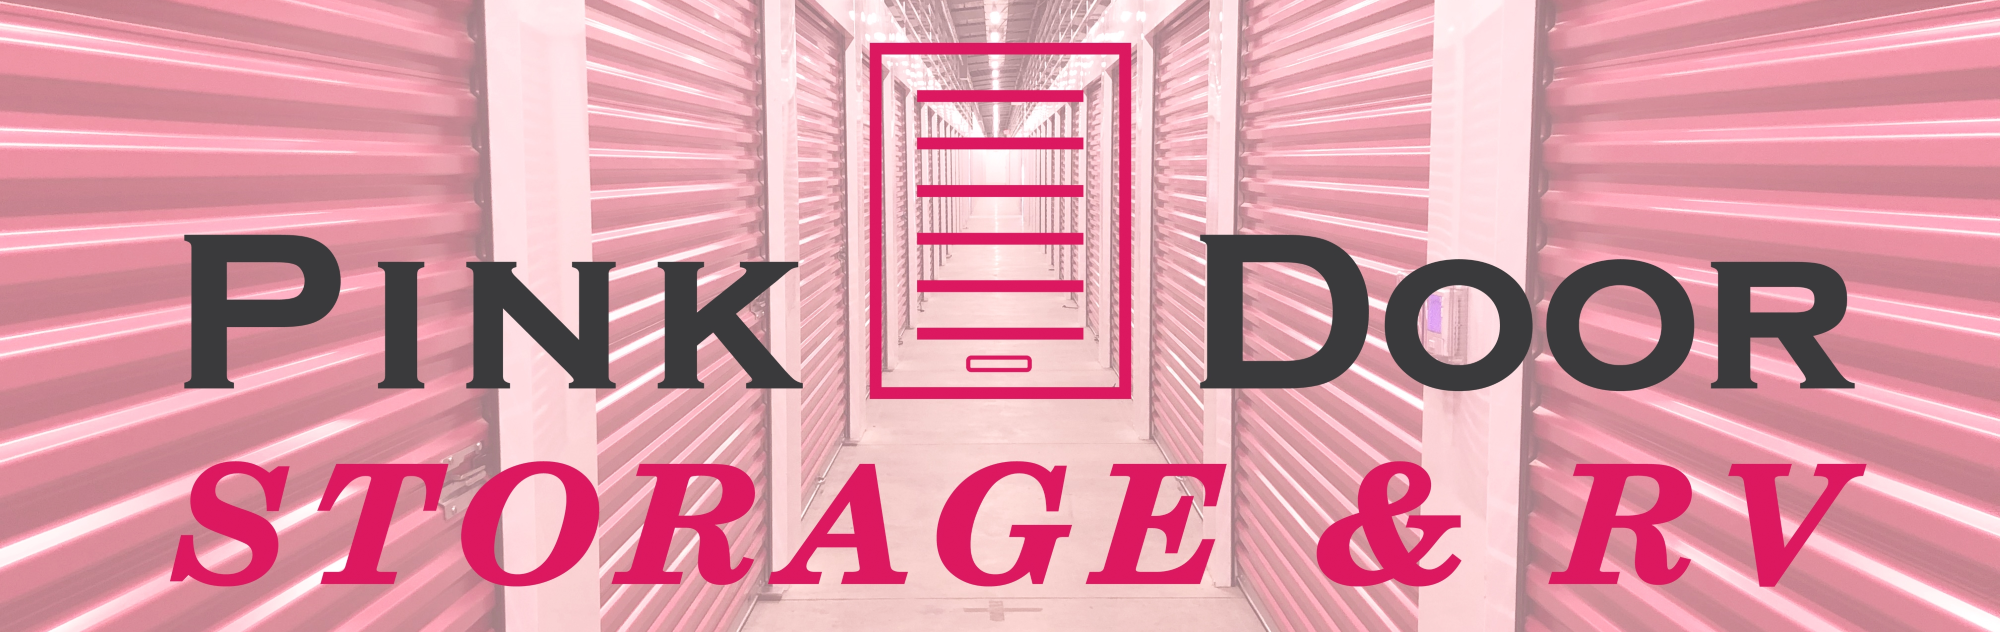 Pink Door Storage & RV - Experience The Difference